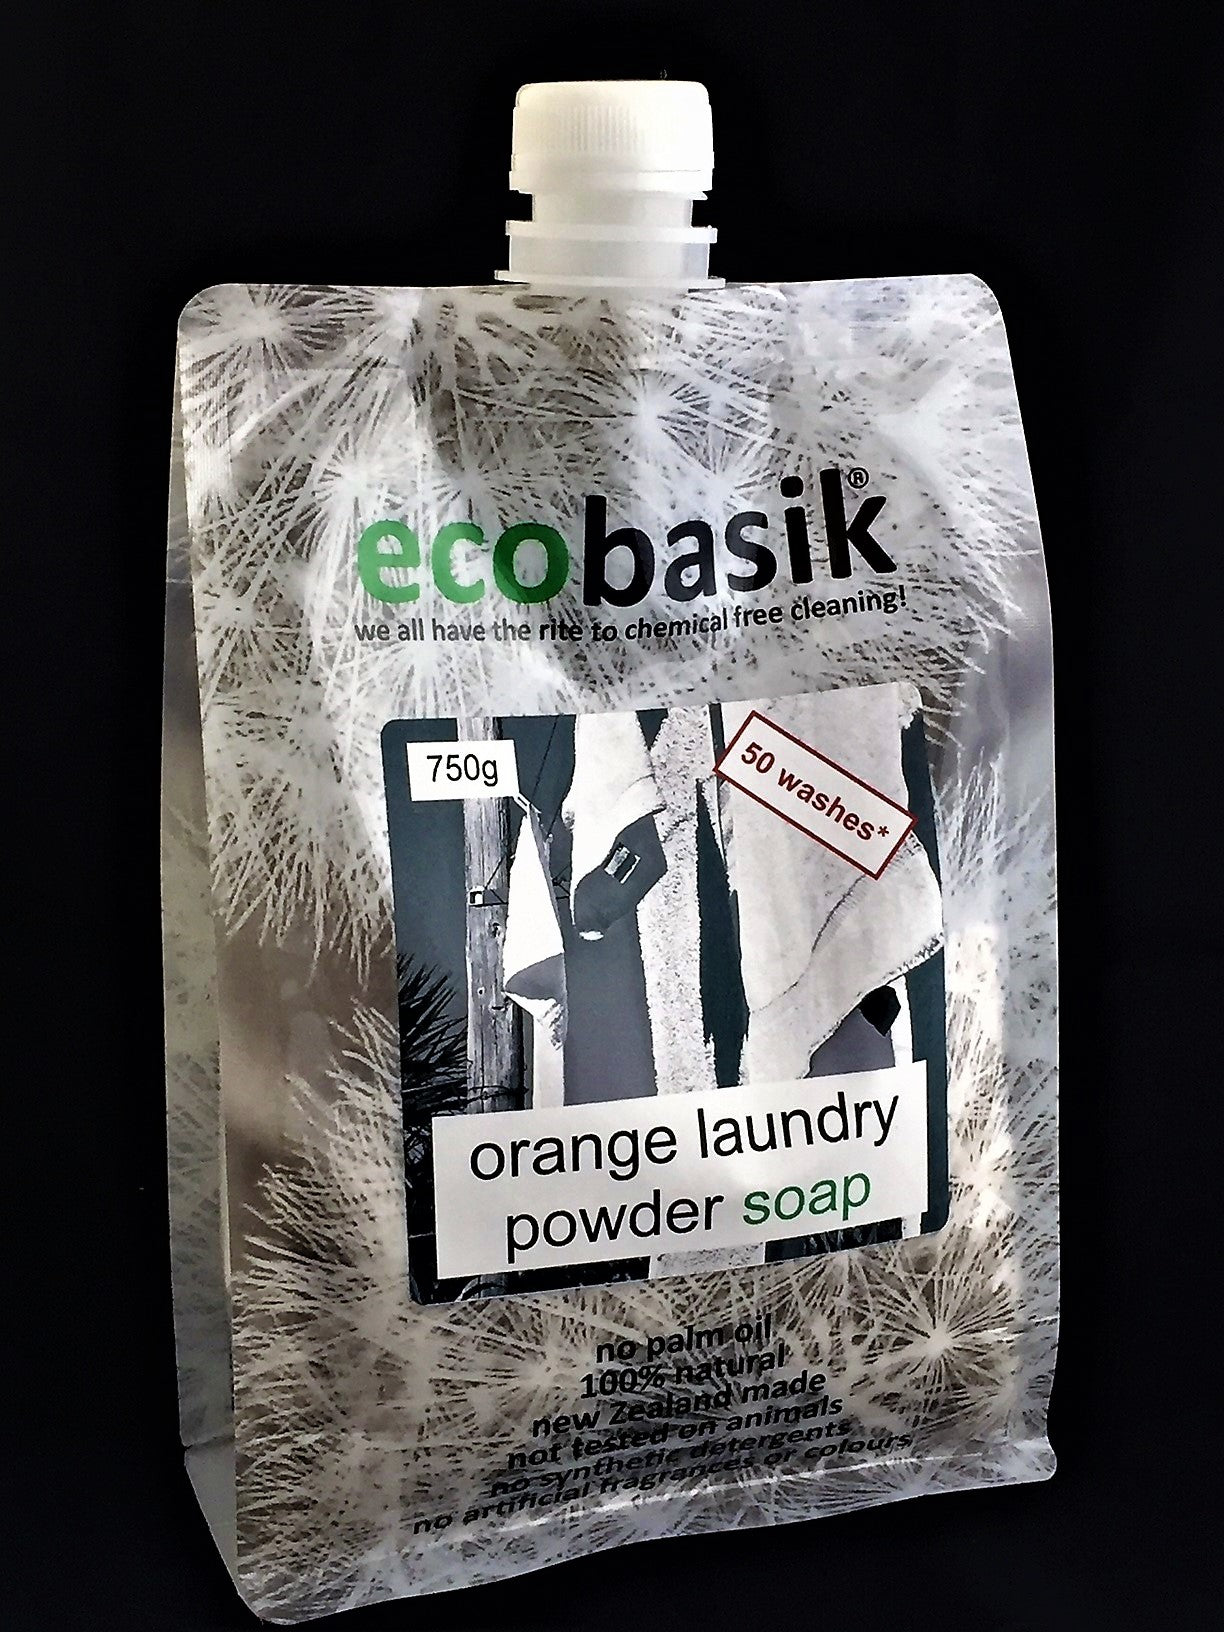 ecobasik - orange laundry powder soap - SAFE cleaning for the home!